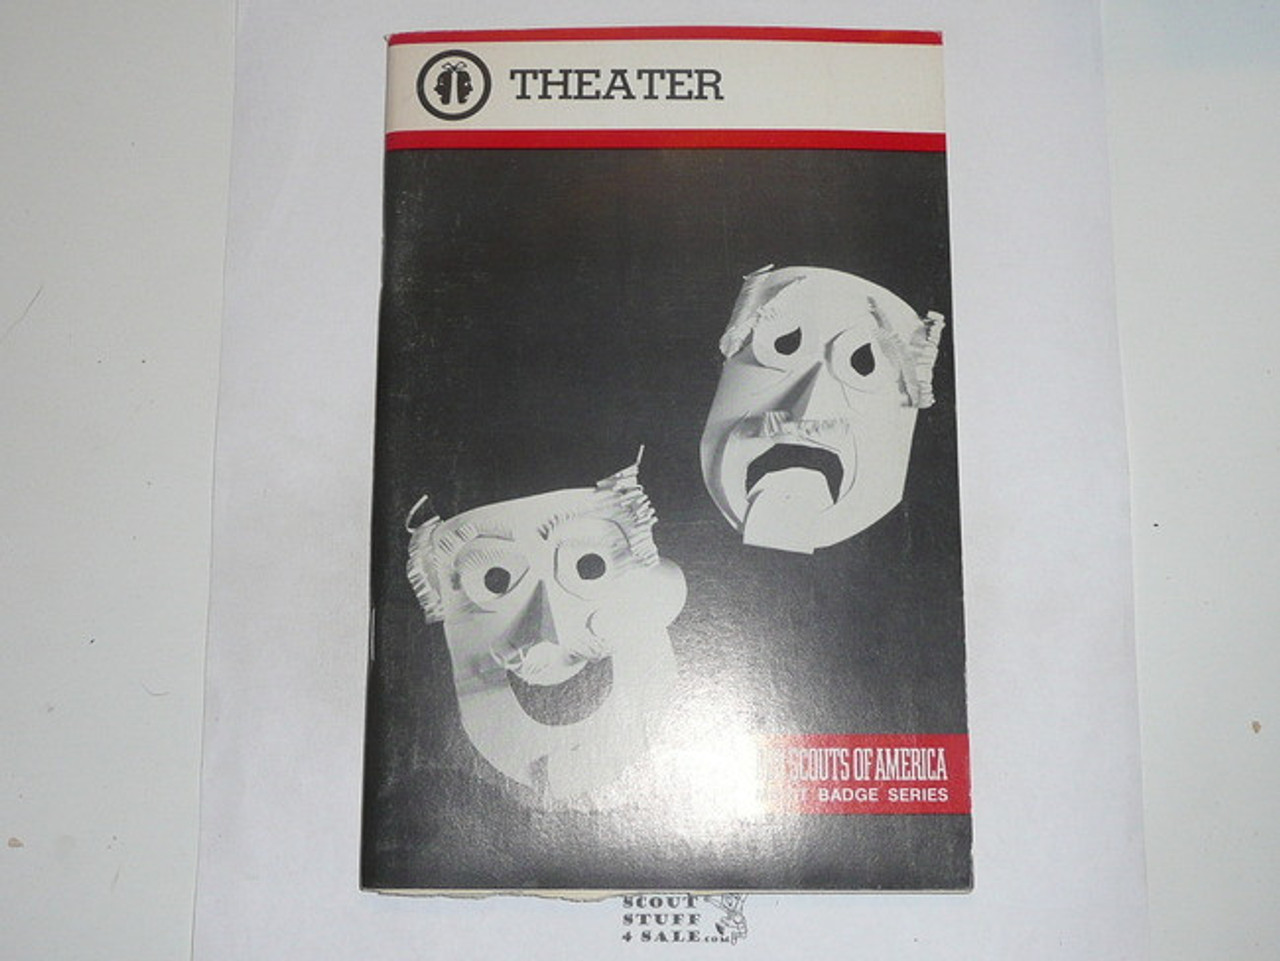 Theater Merit Badge Pamphlet, Type 9, Red Band Cover, 2-86 Printing